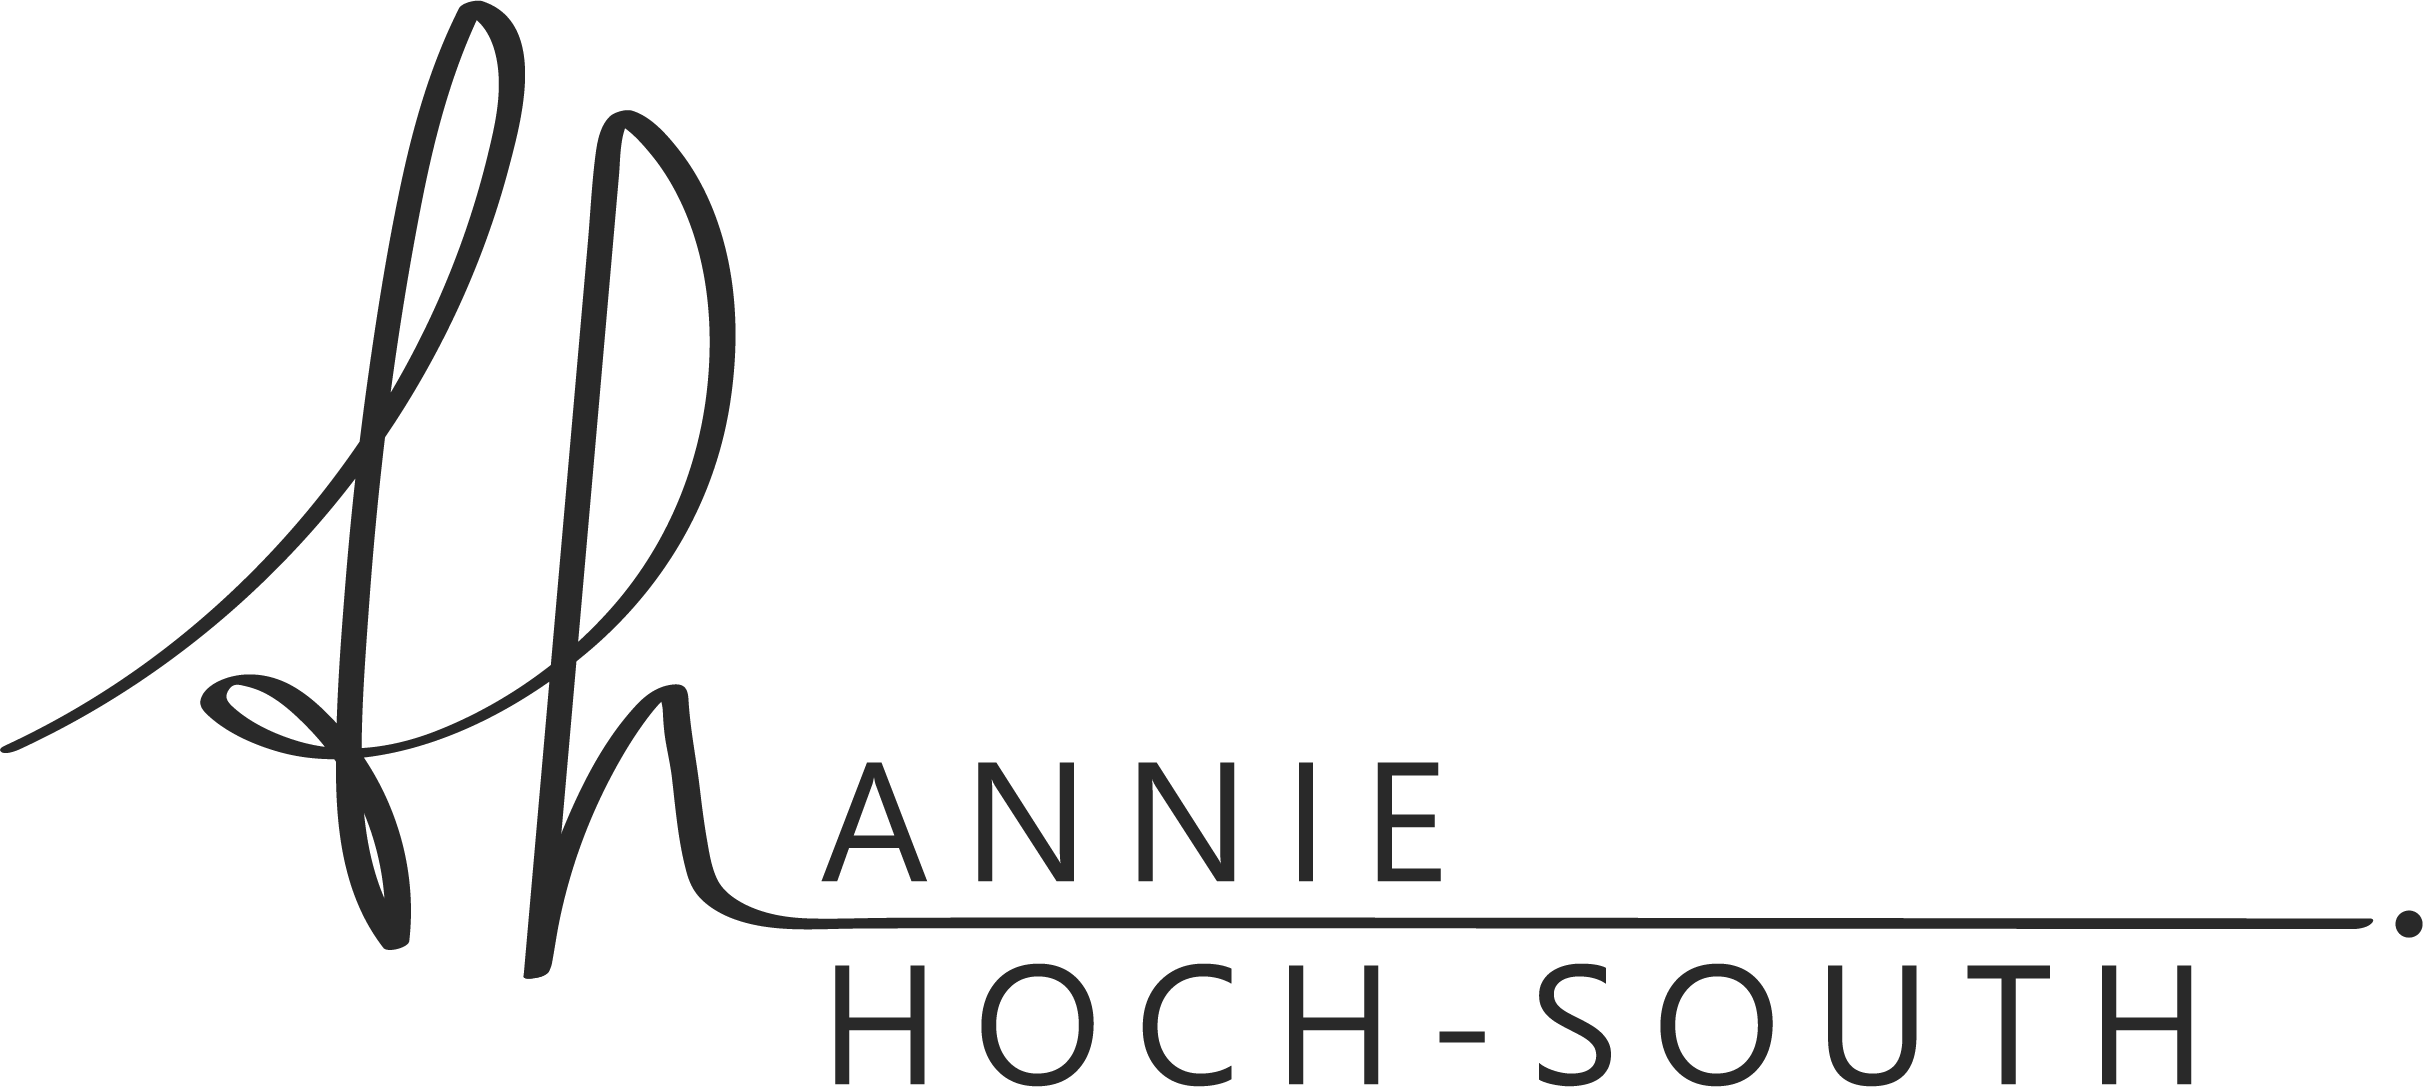 Annie Hoch-South black icon with cursive initials flowing to print font